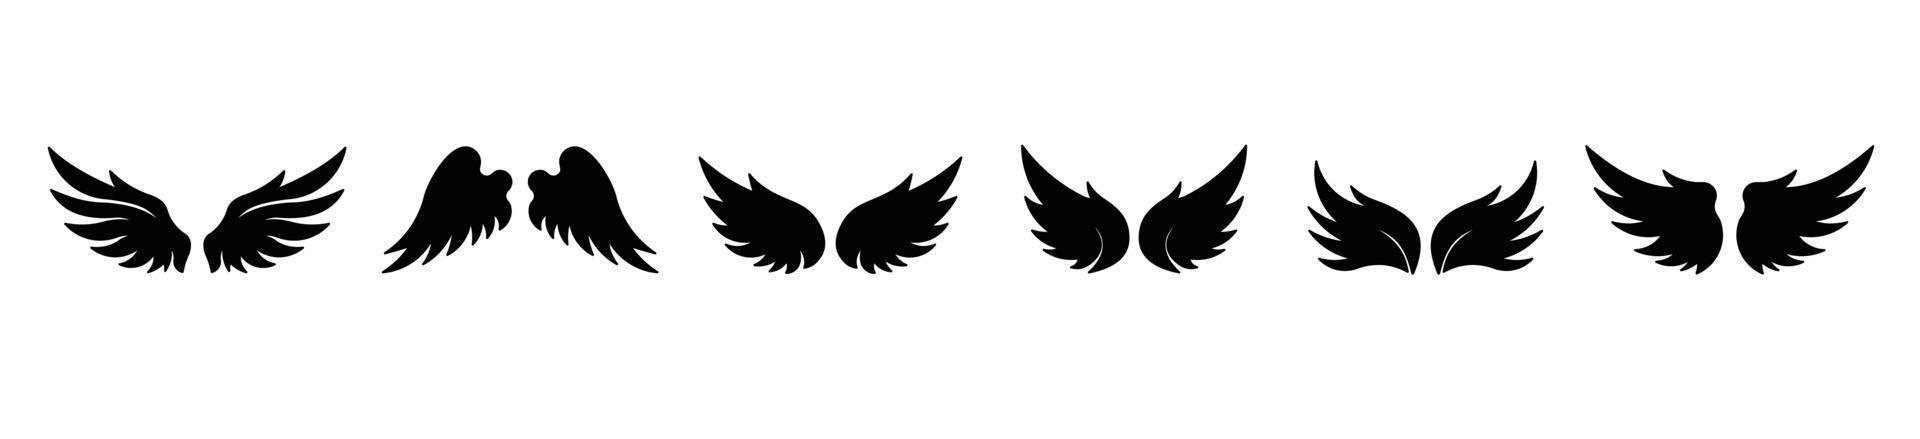 Set of blank shields with wings, Set of heraldic winged shields in different shapes with bird vector